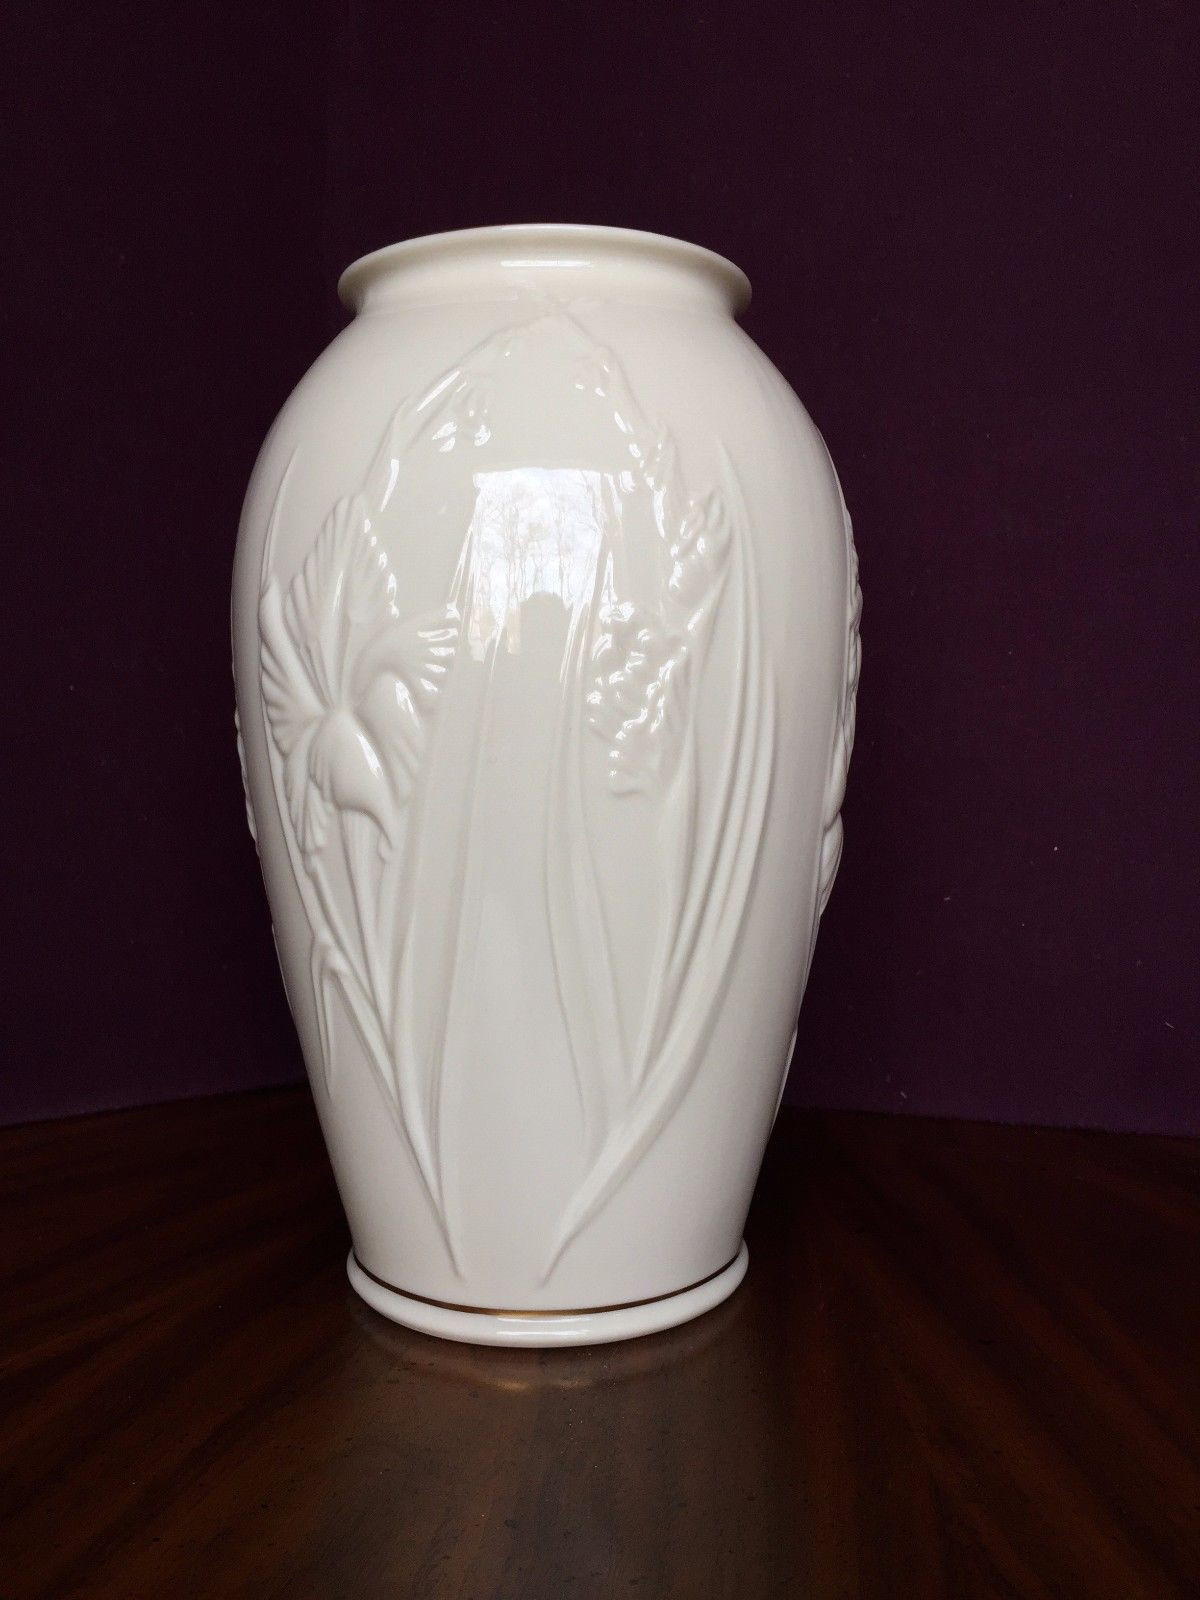 20 Ideal Lenox Masterpiece Small Vase 2024 free download lenox masterpiece small vase of lenox china masterpiece vase 50 00 picclick for lenox china masterpiece vase 1 of 1only 1 available